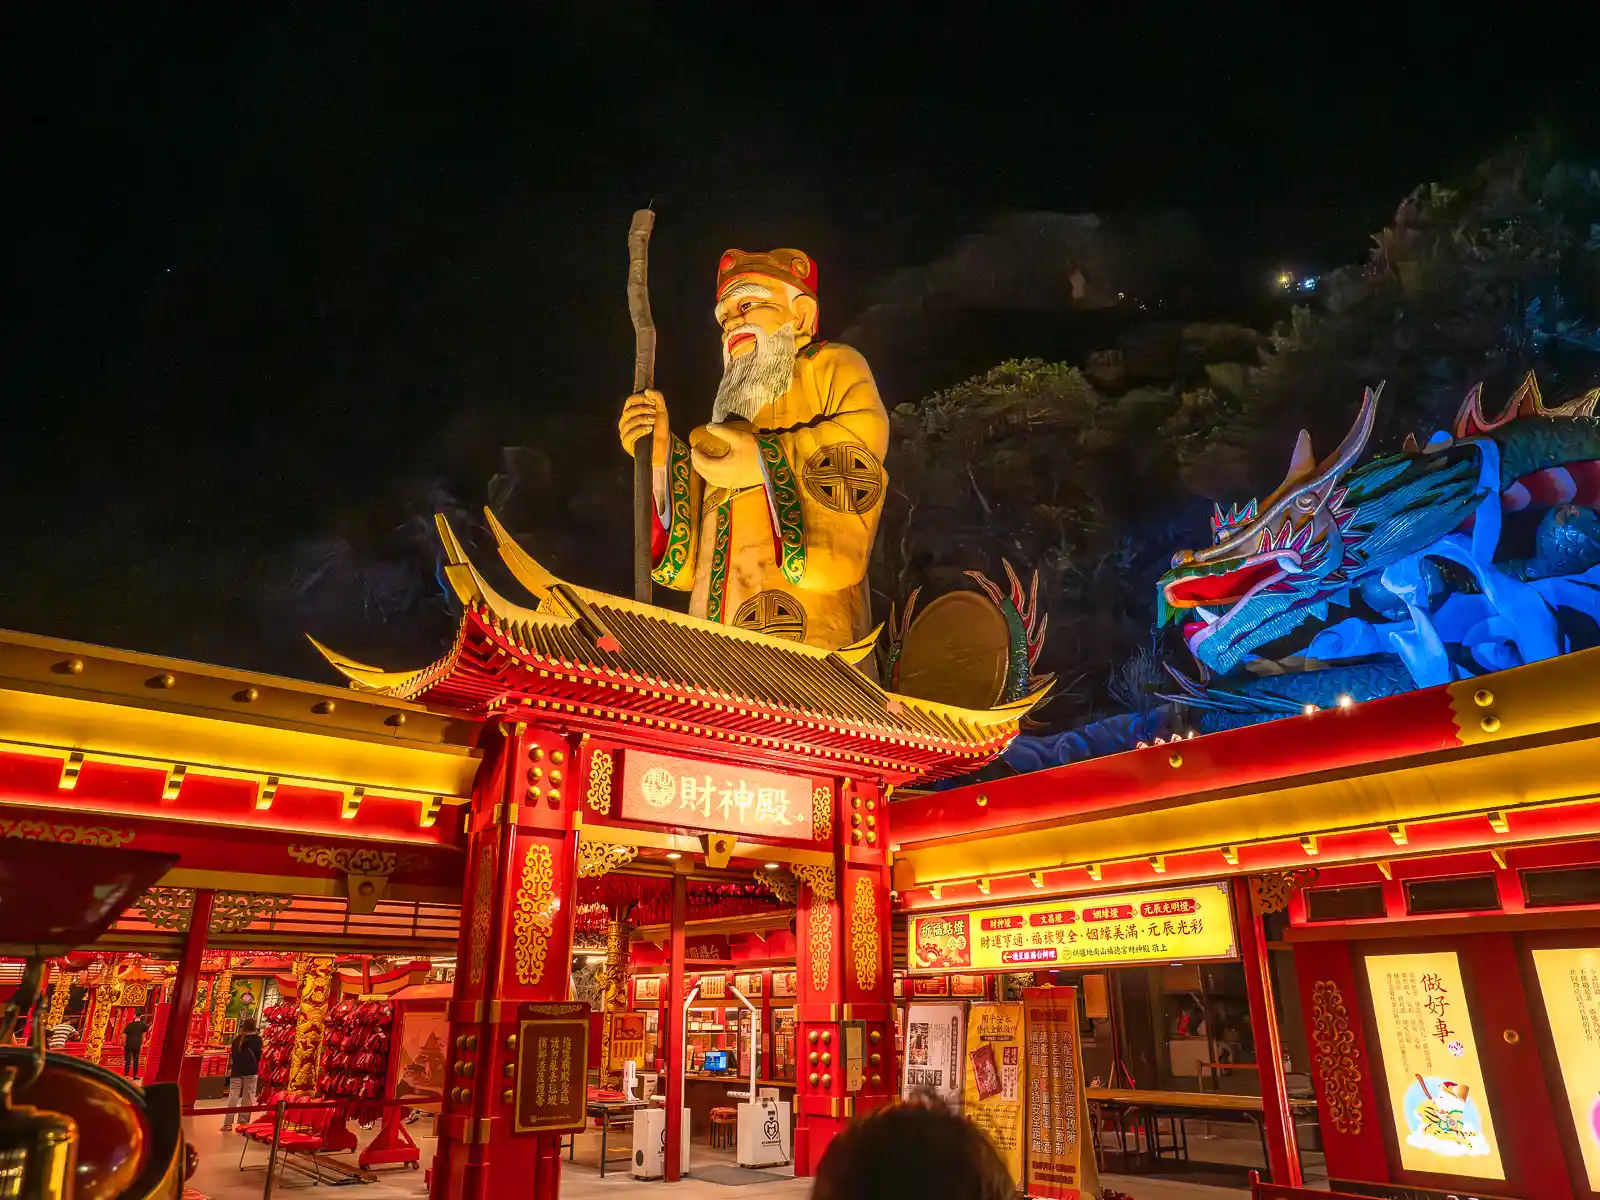 A giant Earth God statue, with a dragon on its side can be seen brightly illuminated on top of the God of Riches Temple at night.